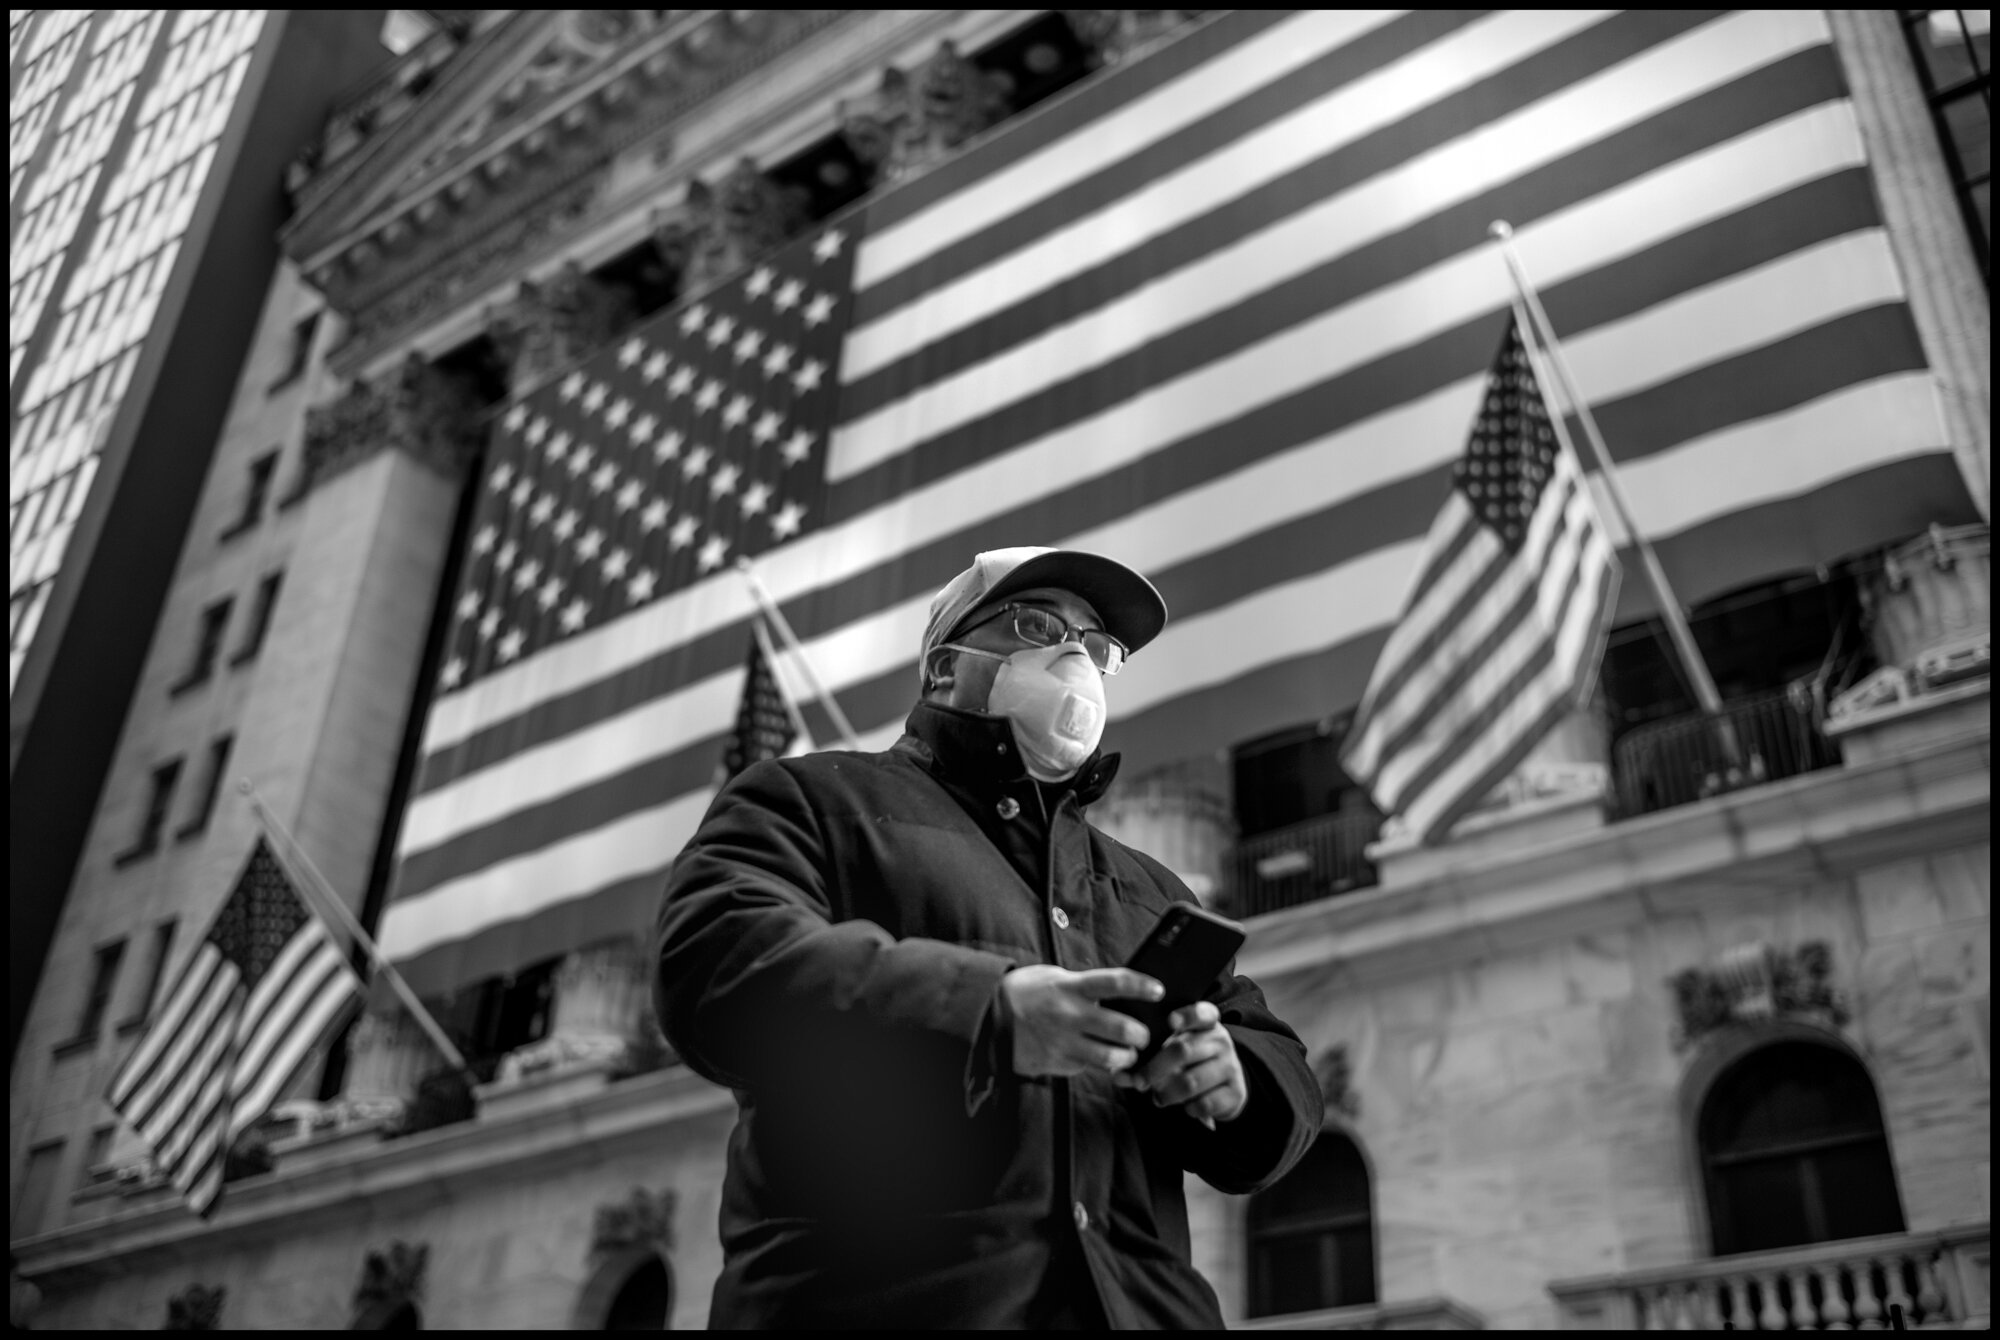  Arthur, 42, is a banker on Wall Street. He lives two blocks from his firms office. He told me, “I grew up homeless as a kid, and so I remain optimistic that things will always get better. This is temporary”.   March 26, 2020 © Peter Turnley.   ID# 0